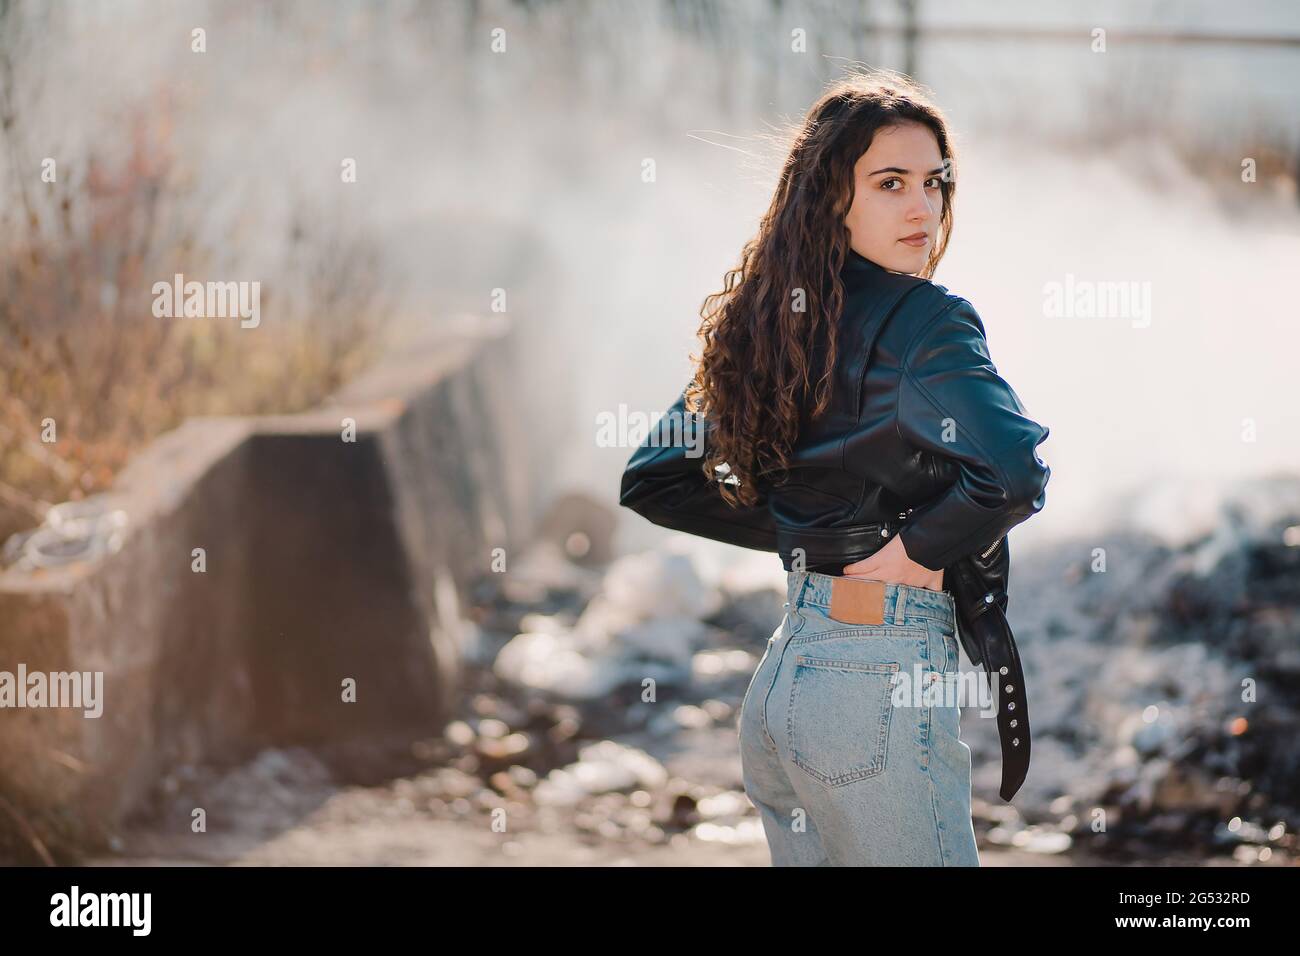 Outdoor portrait of a beautiful teen brunette girl in the black leather jacket with smoke in the background Stock Photo